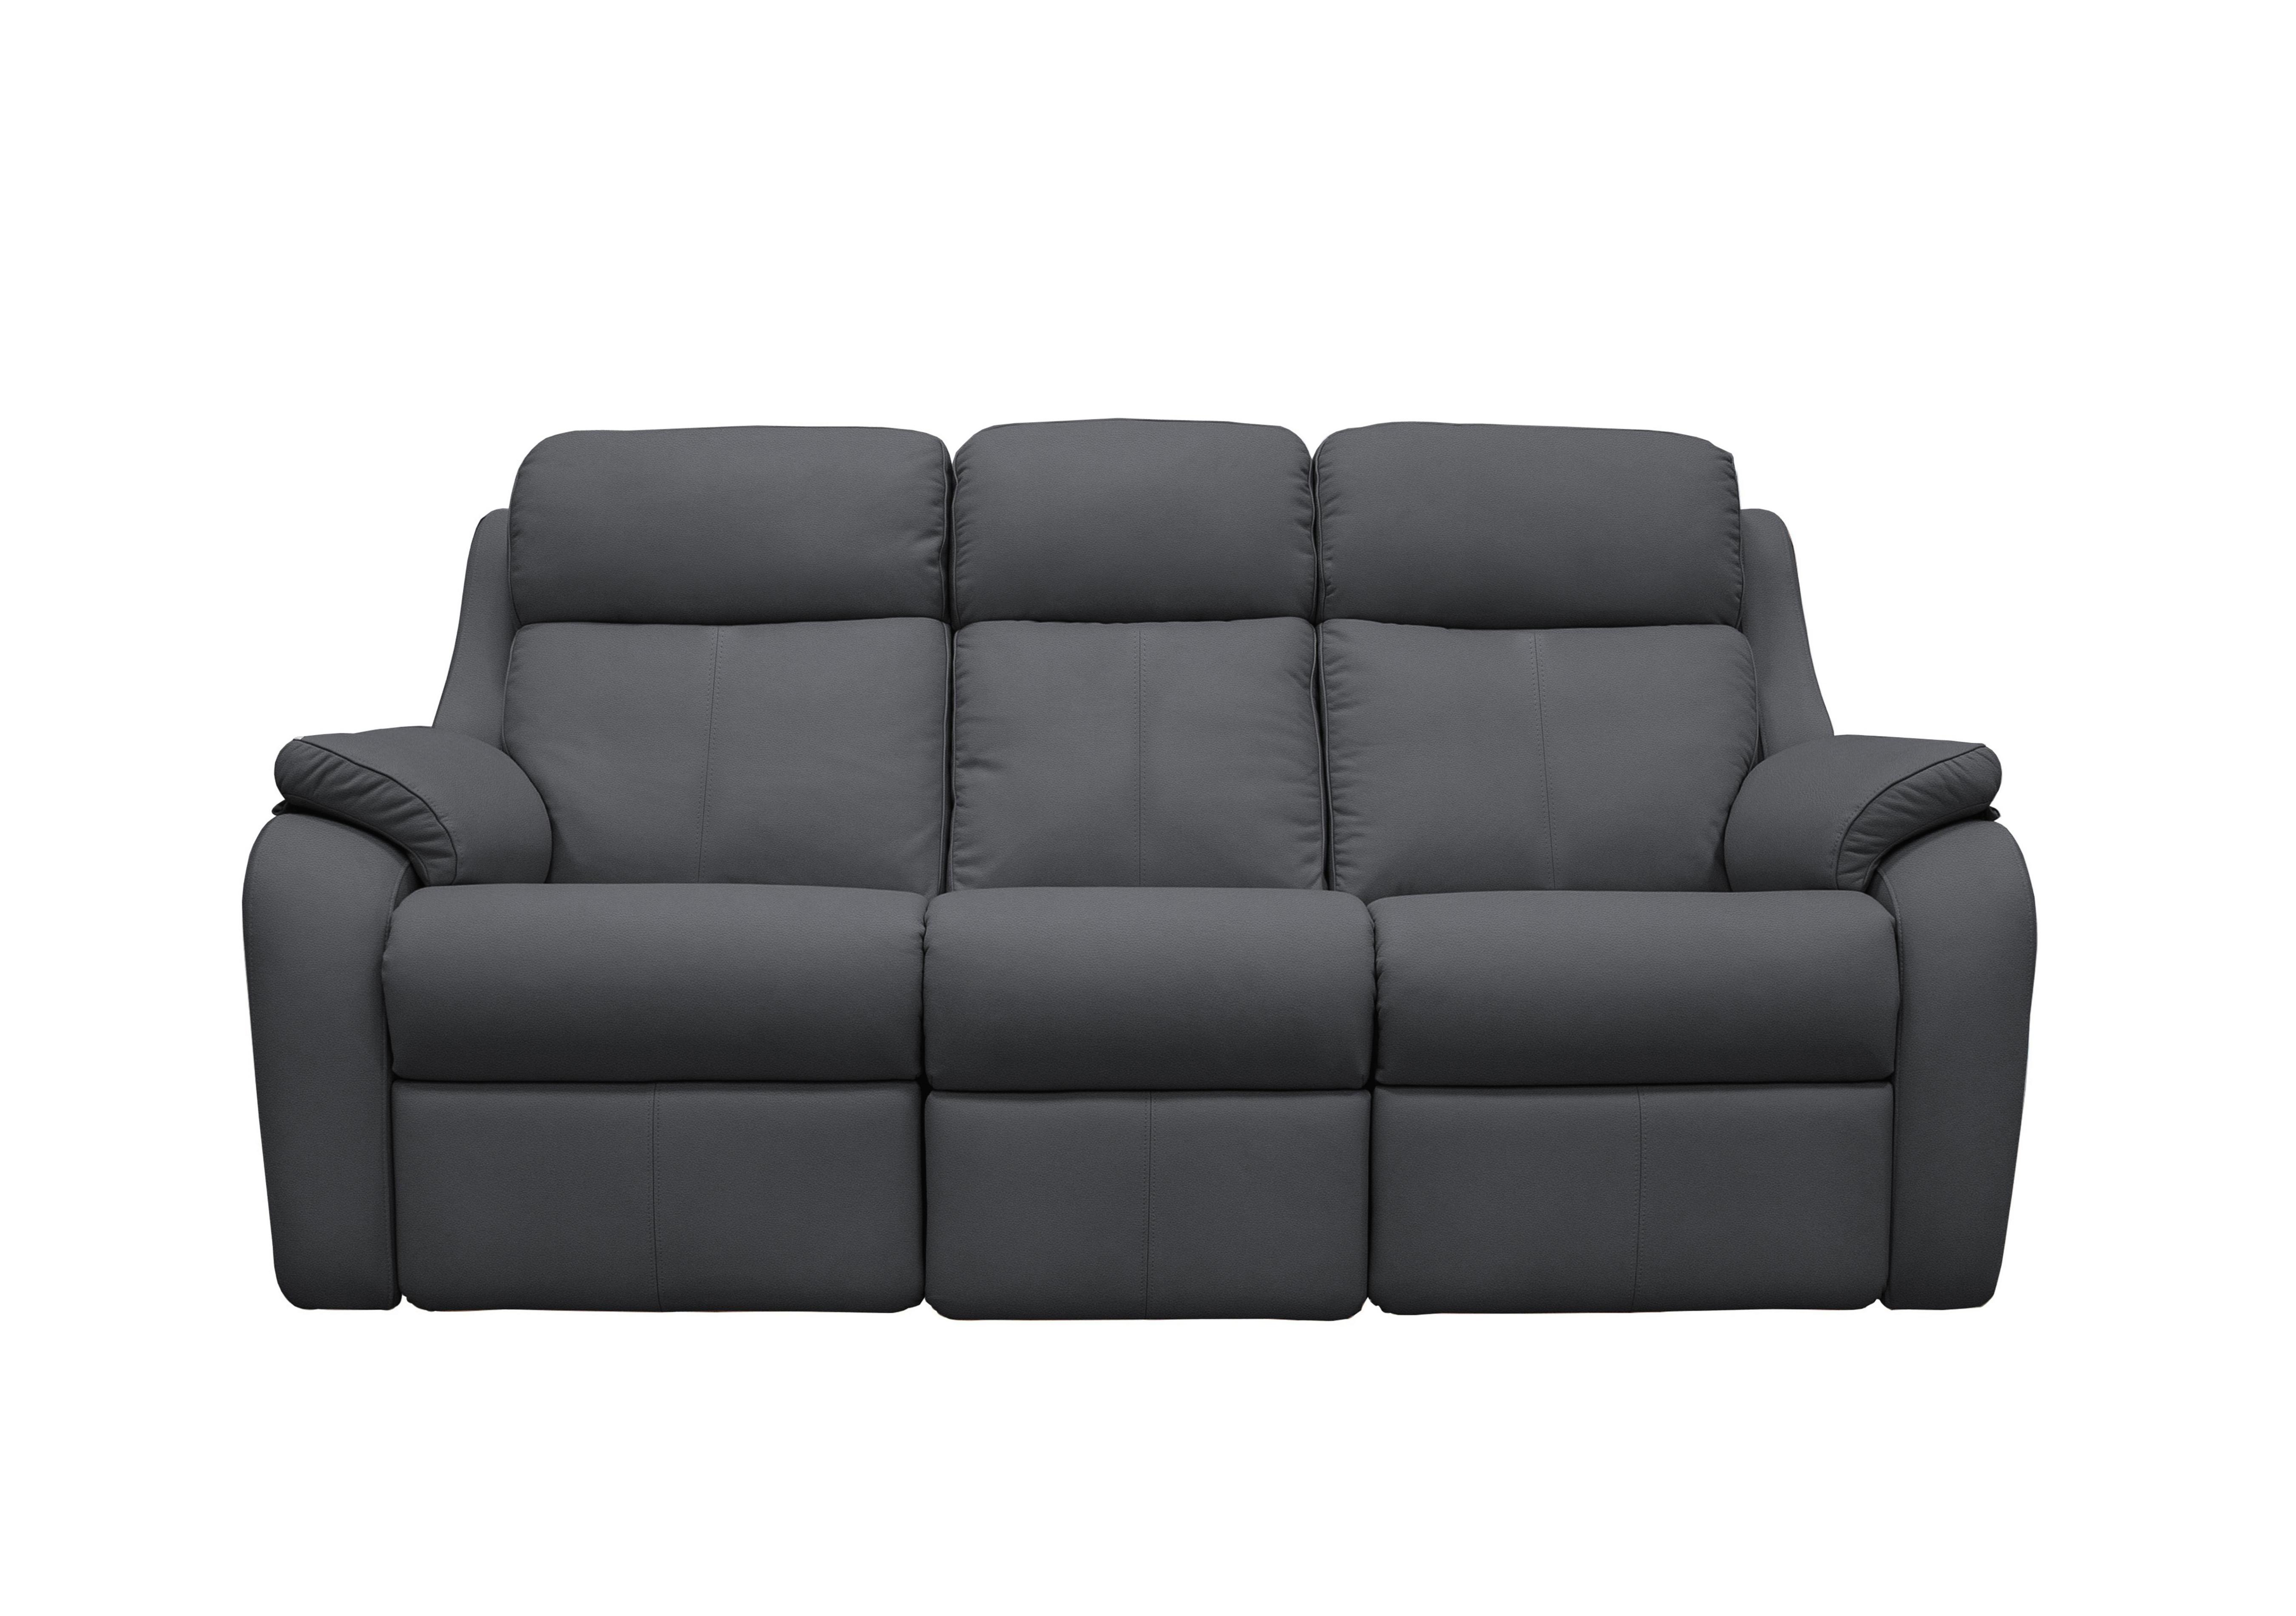 Kingsbury 3 Seater Leather Power Recliner Sofa with Power Headrests in L852 Cambridge Petrol Blue on Furniture Village